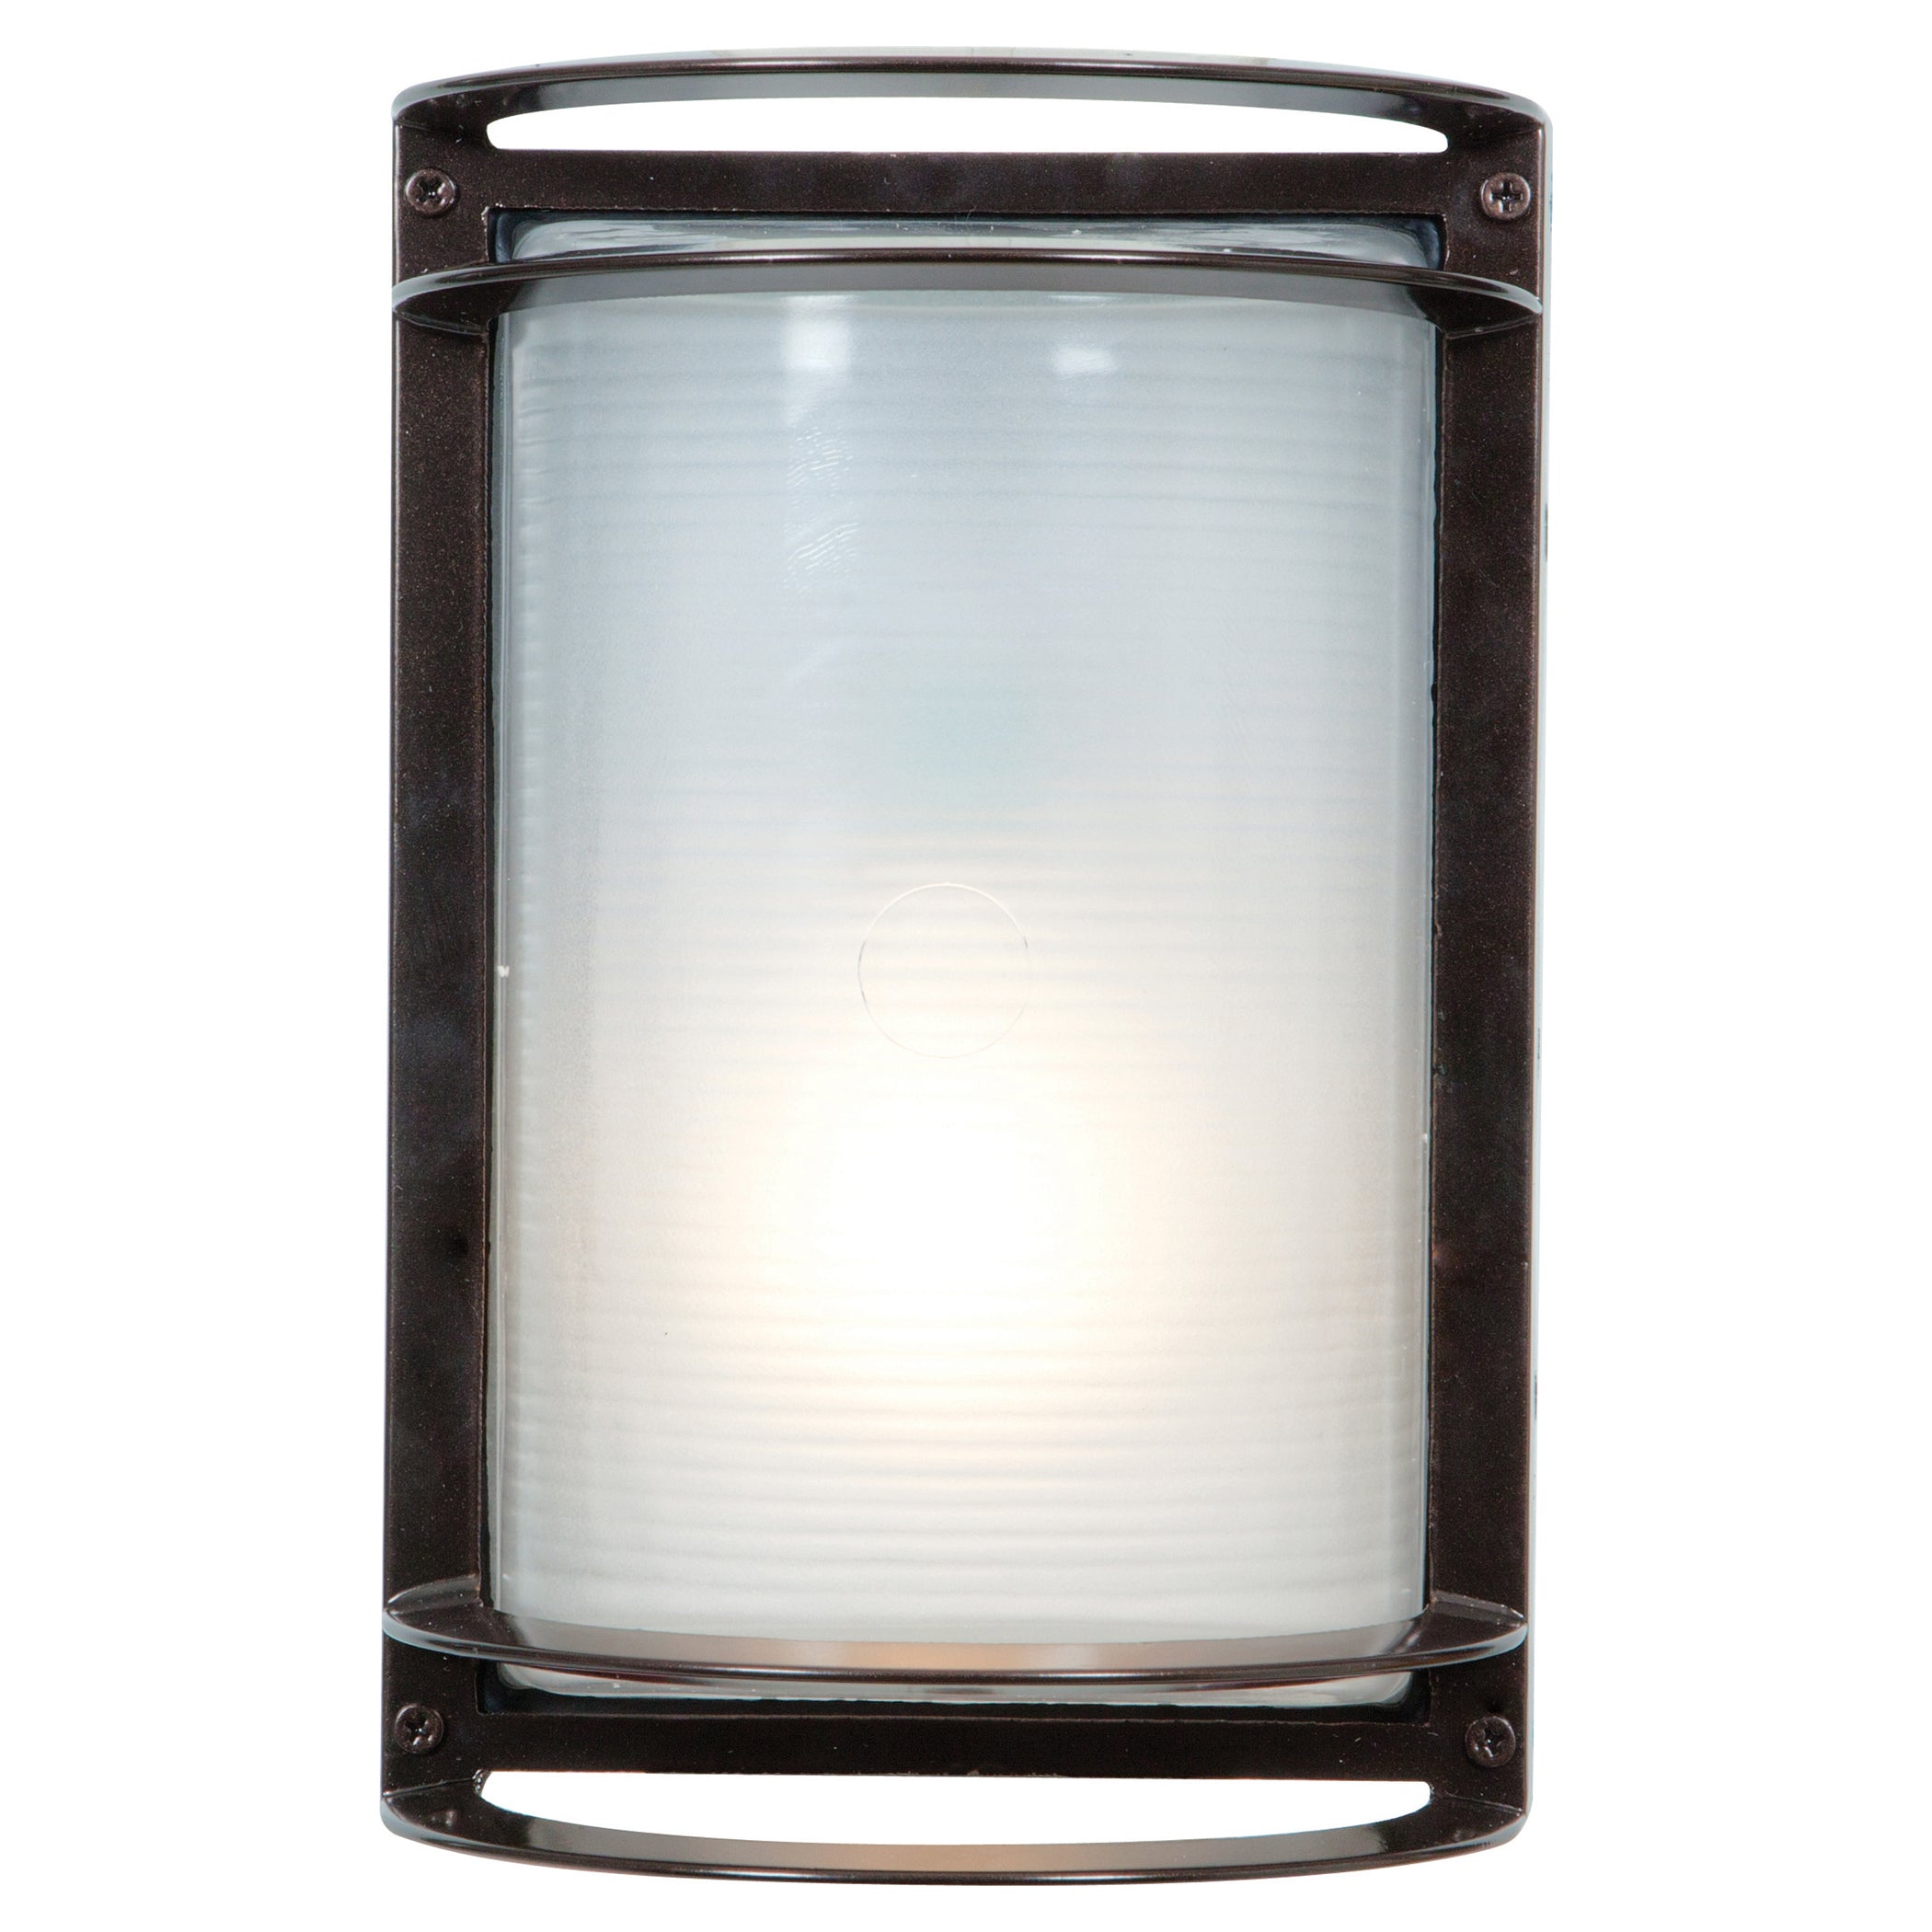 Nevis 10.5" Outdoor Wall Mount Sconce